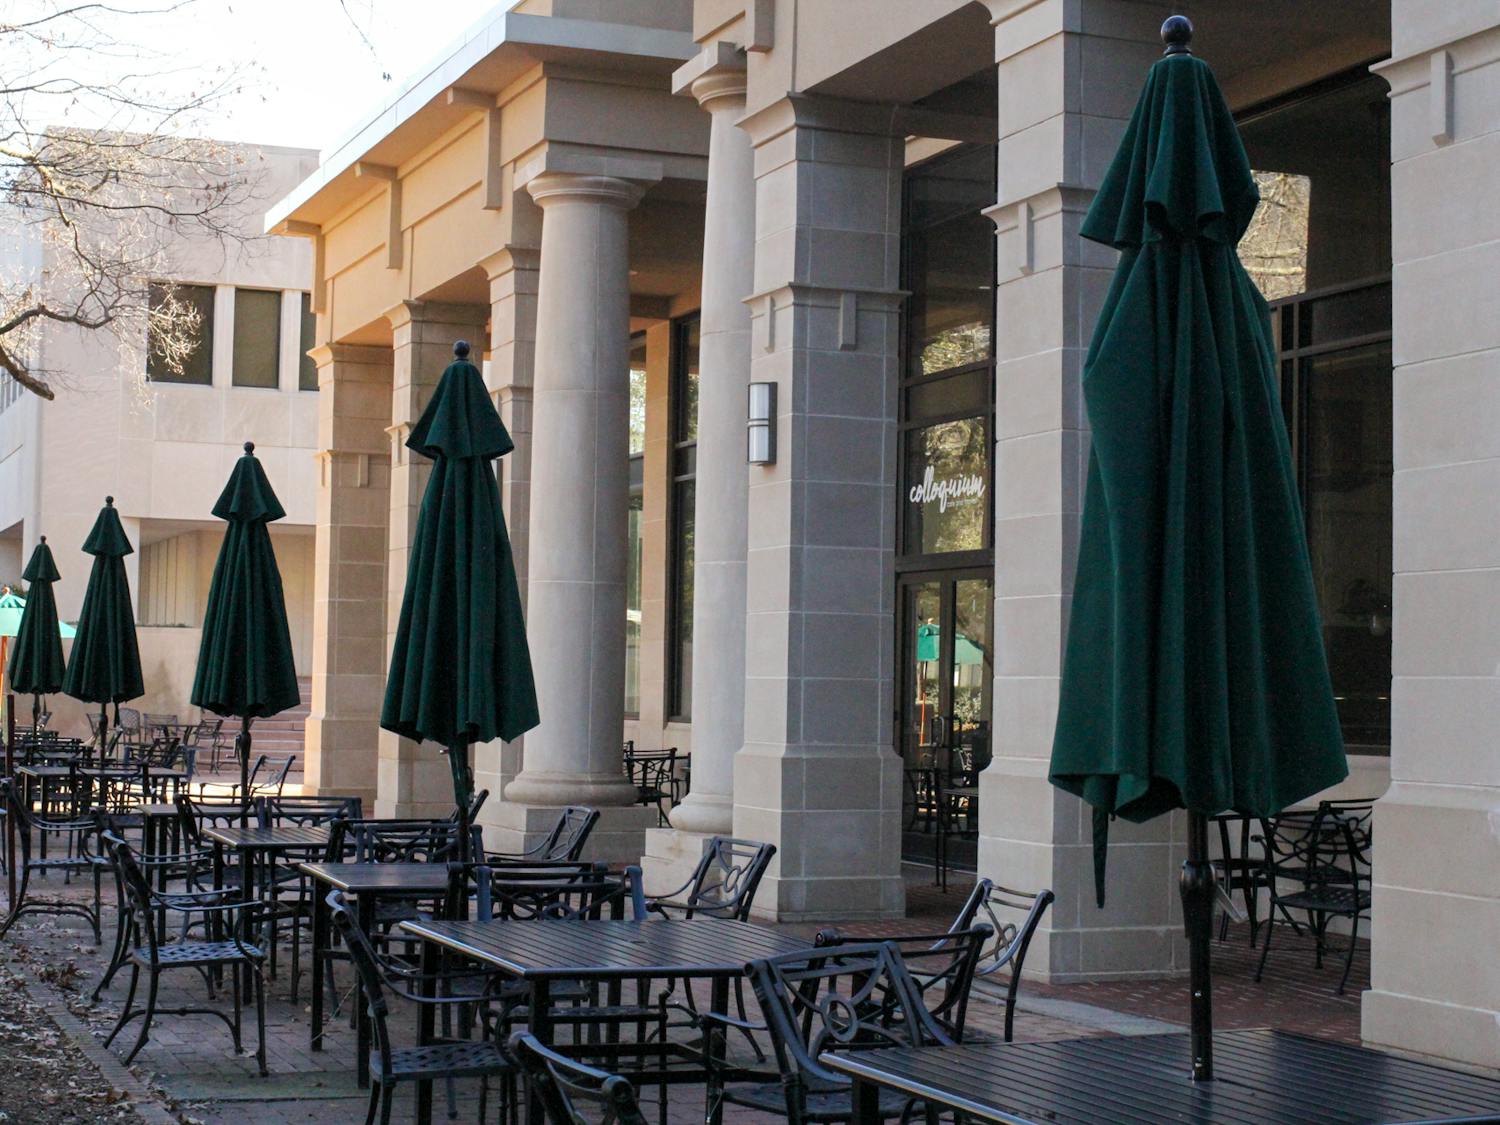 Tables line the sidewalk outside the Colloquium Café at the University of South Carolina on Feb. 4, 2023. The café’s outdoor seating is one of many popular study locations on campus.